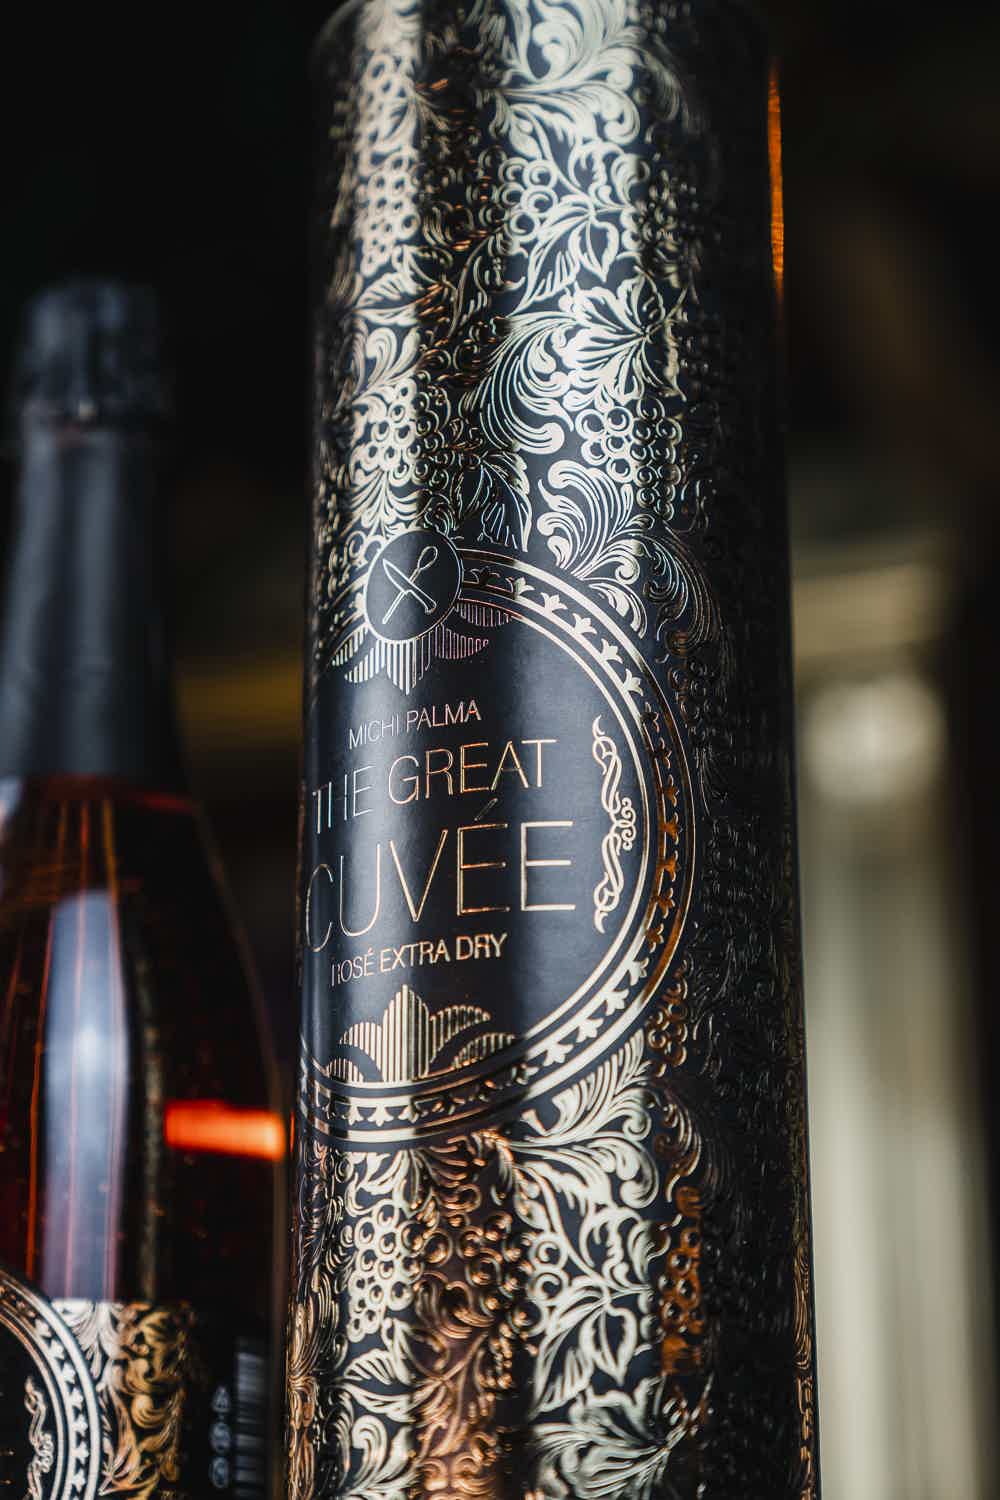 The Great Cuvée (Set of 6): The Great Cuvée Rosé Extra Dry